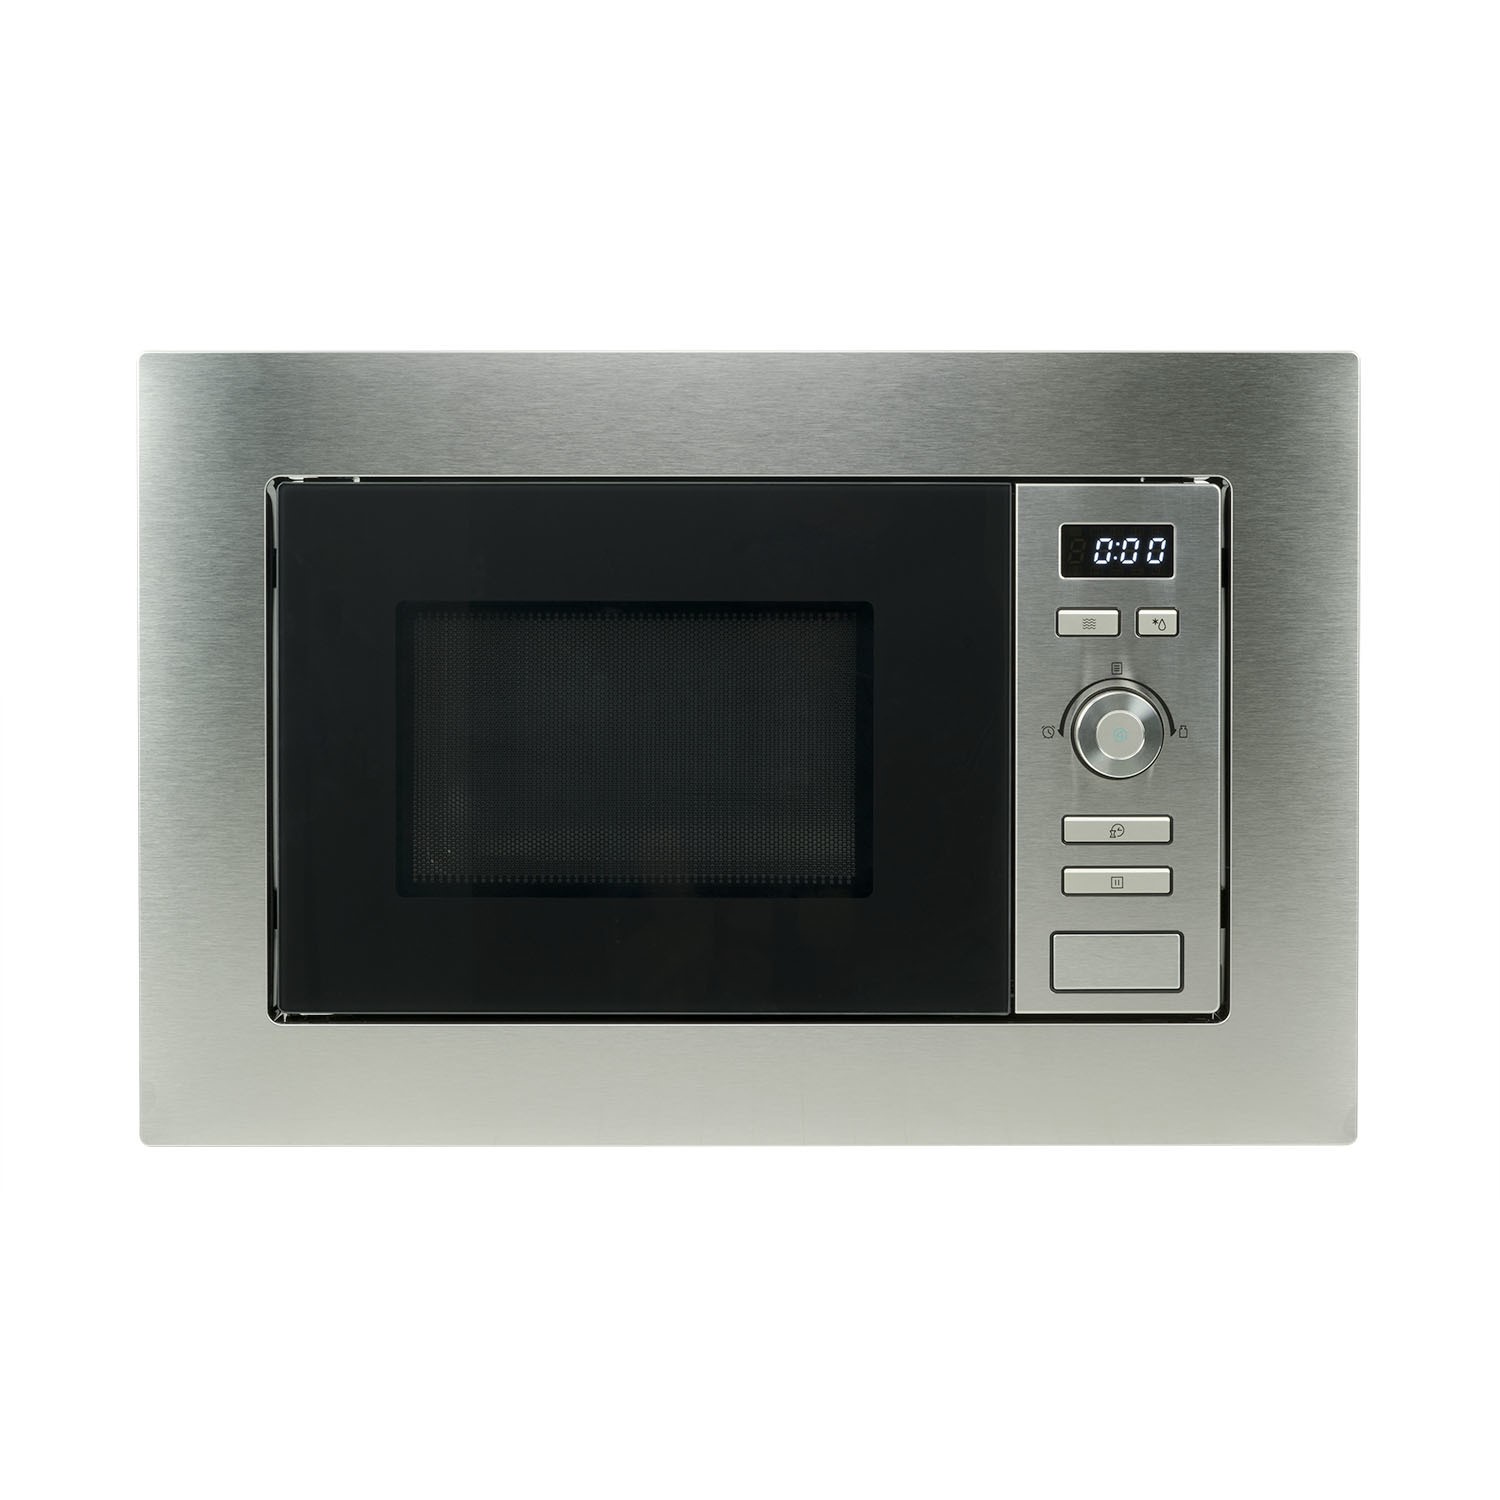 Built-in 17L Compact Cupboard Fit Microwave Oven